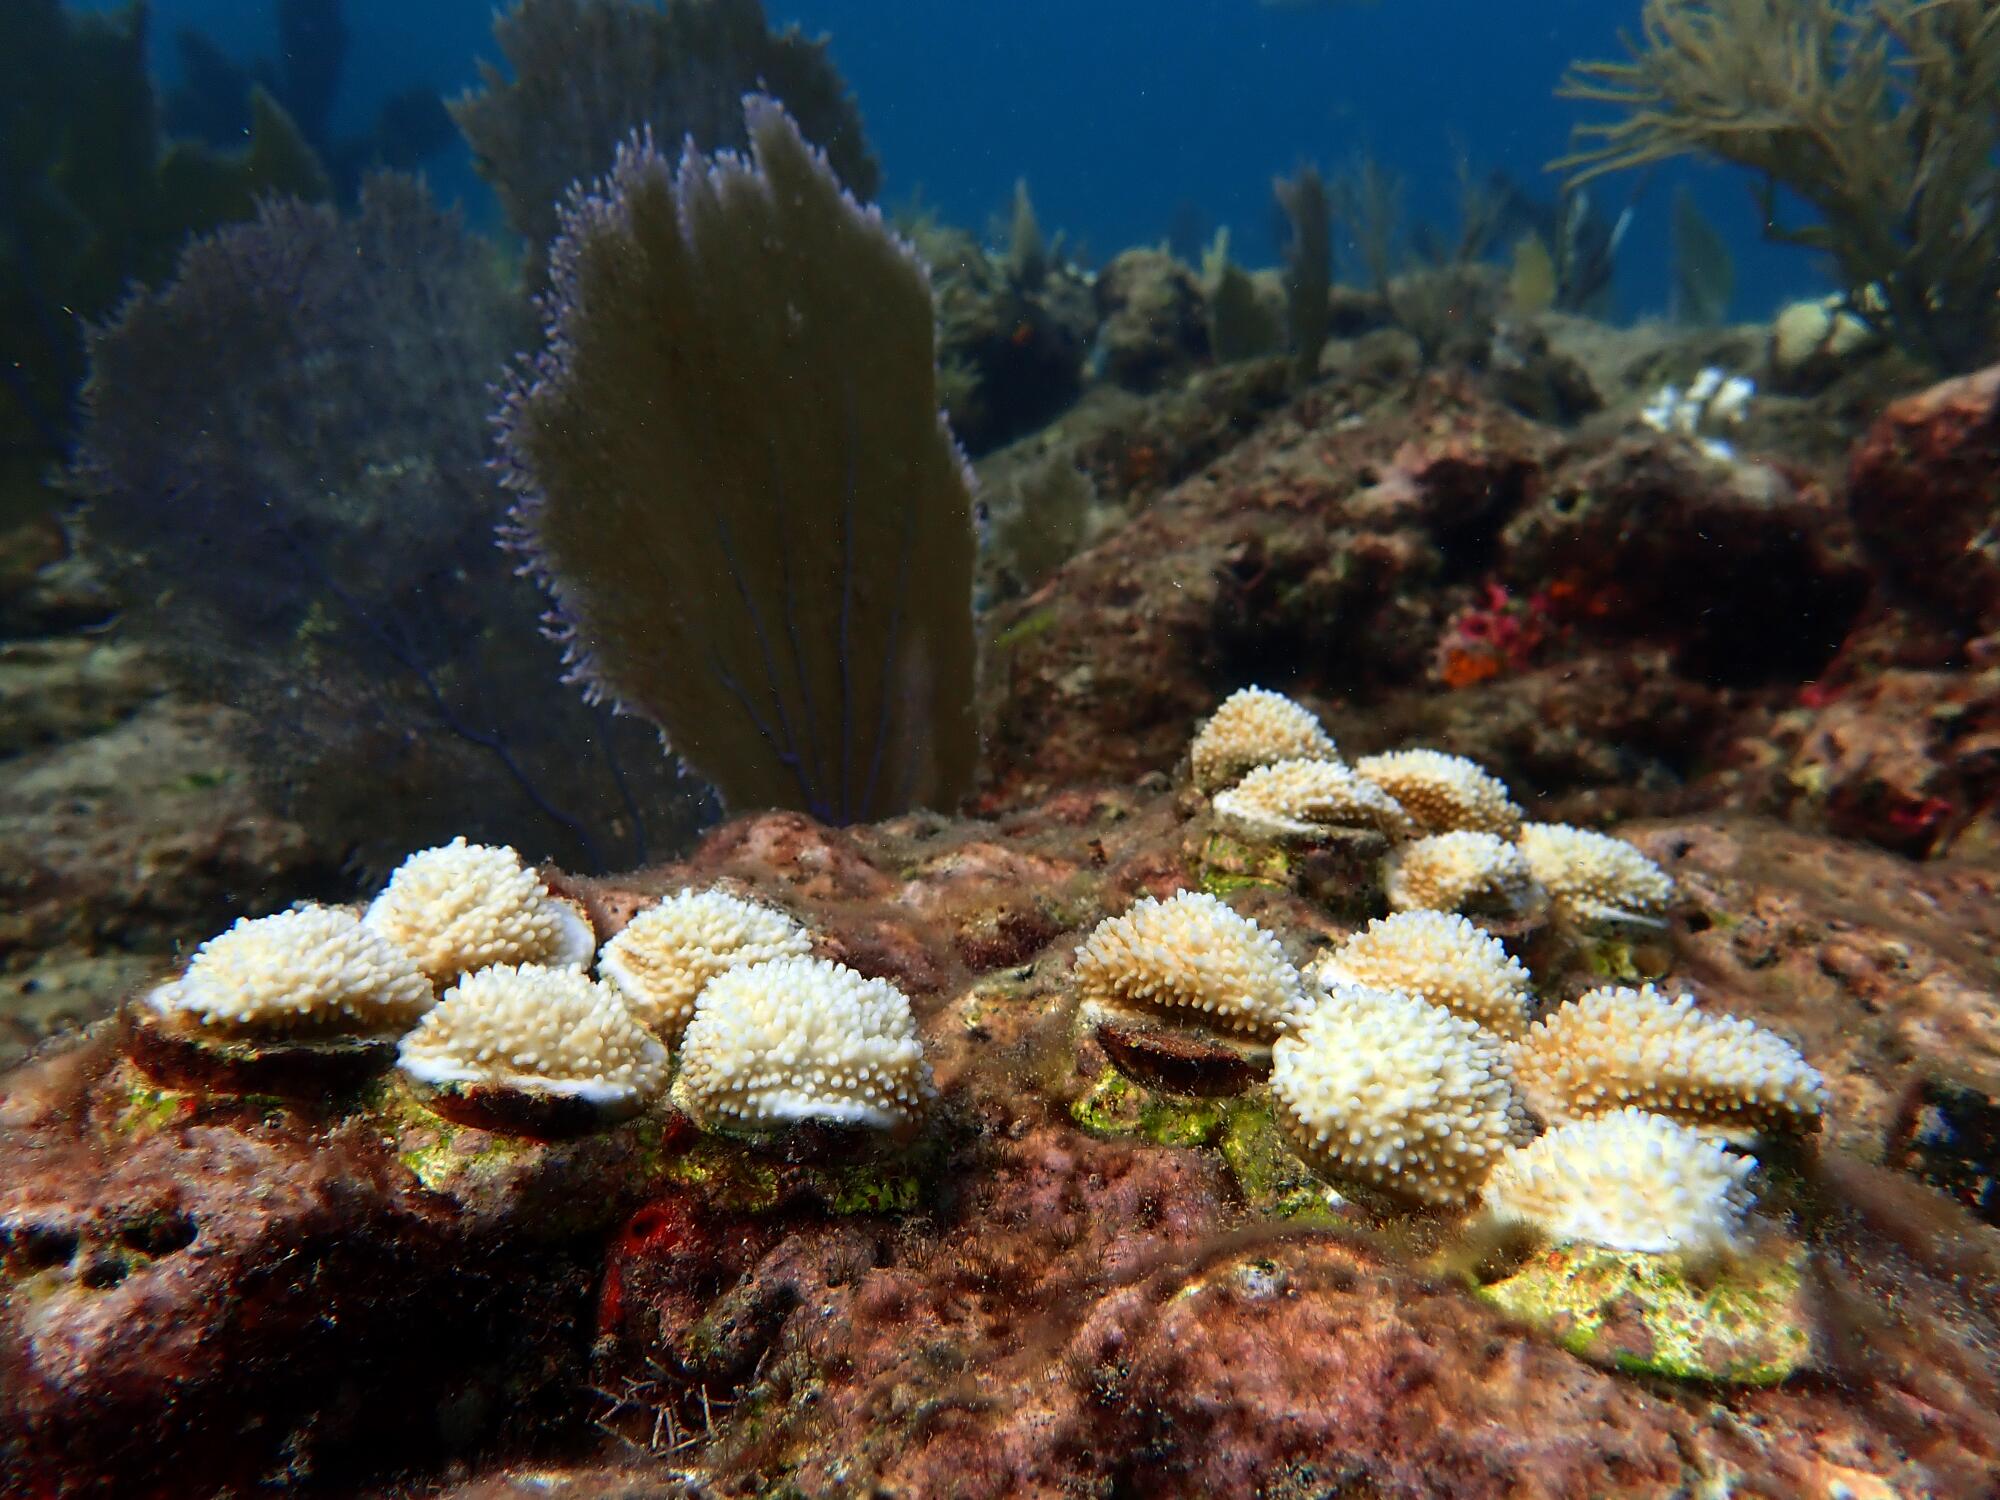 At Alligator Reef off the Florida Keys, transplanted elkhorn coral show signs of bleaching.